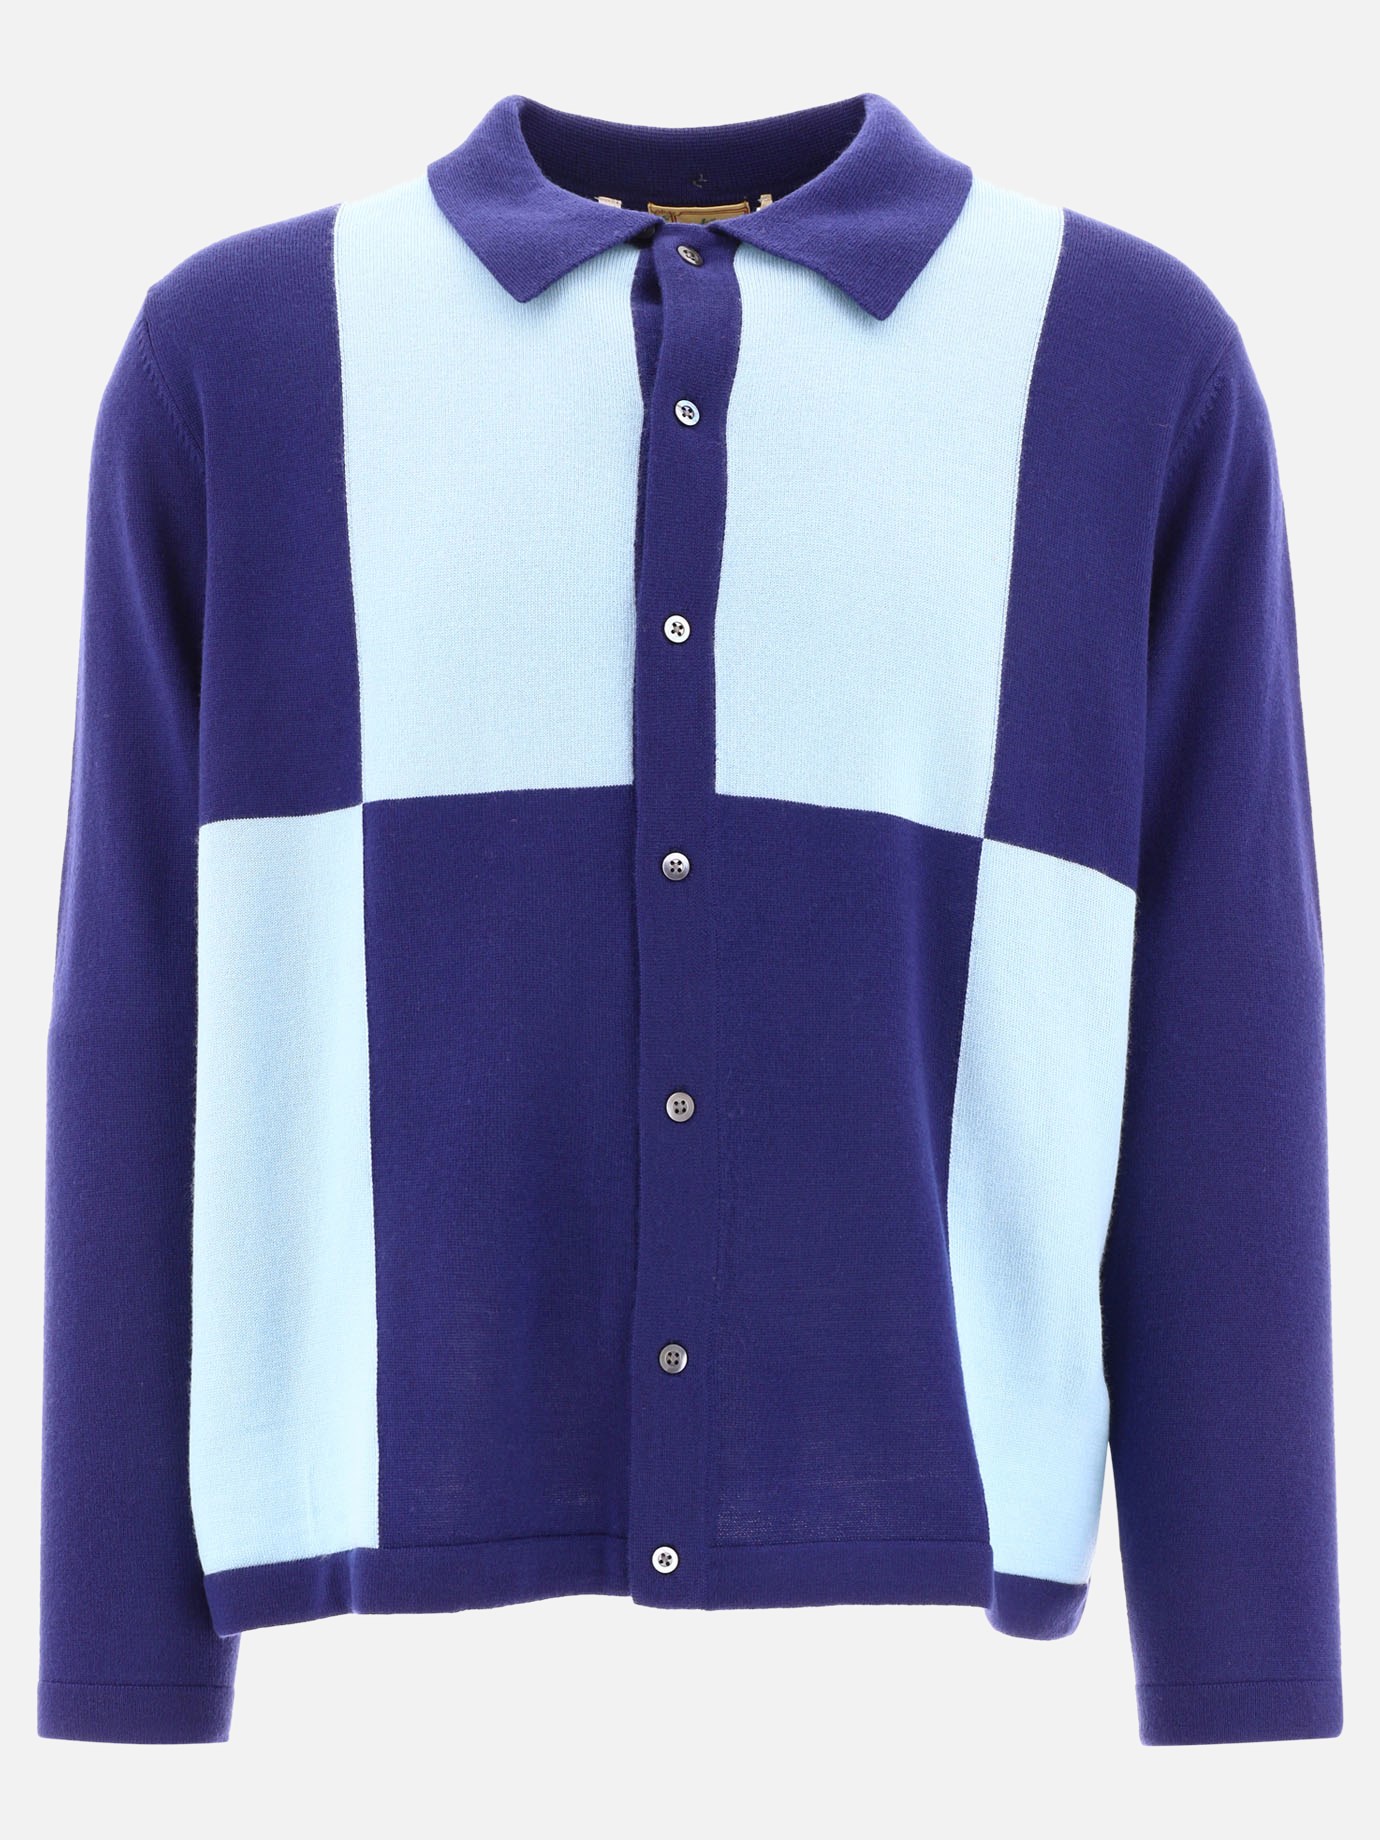 Maglione  Colorblock  by Levi's Vintage Clothing